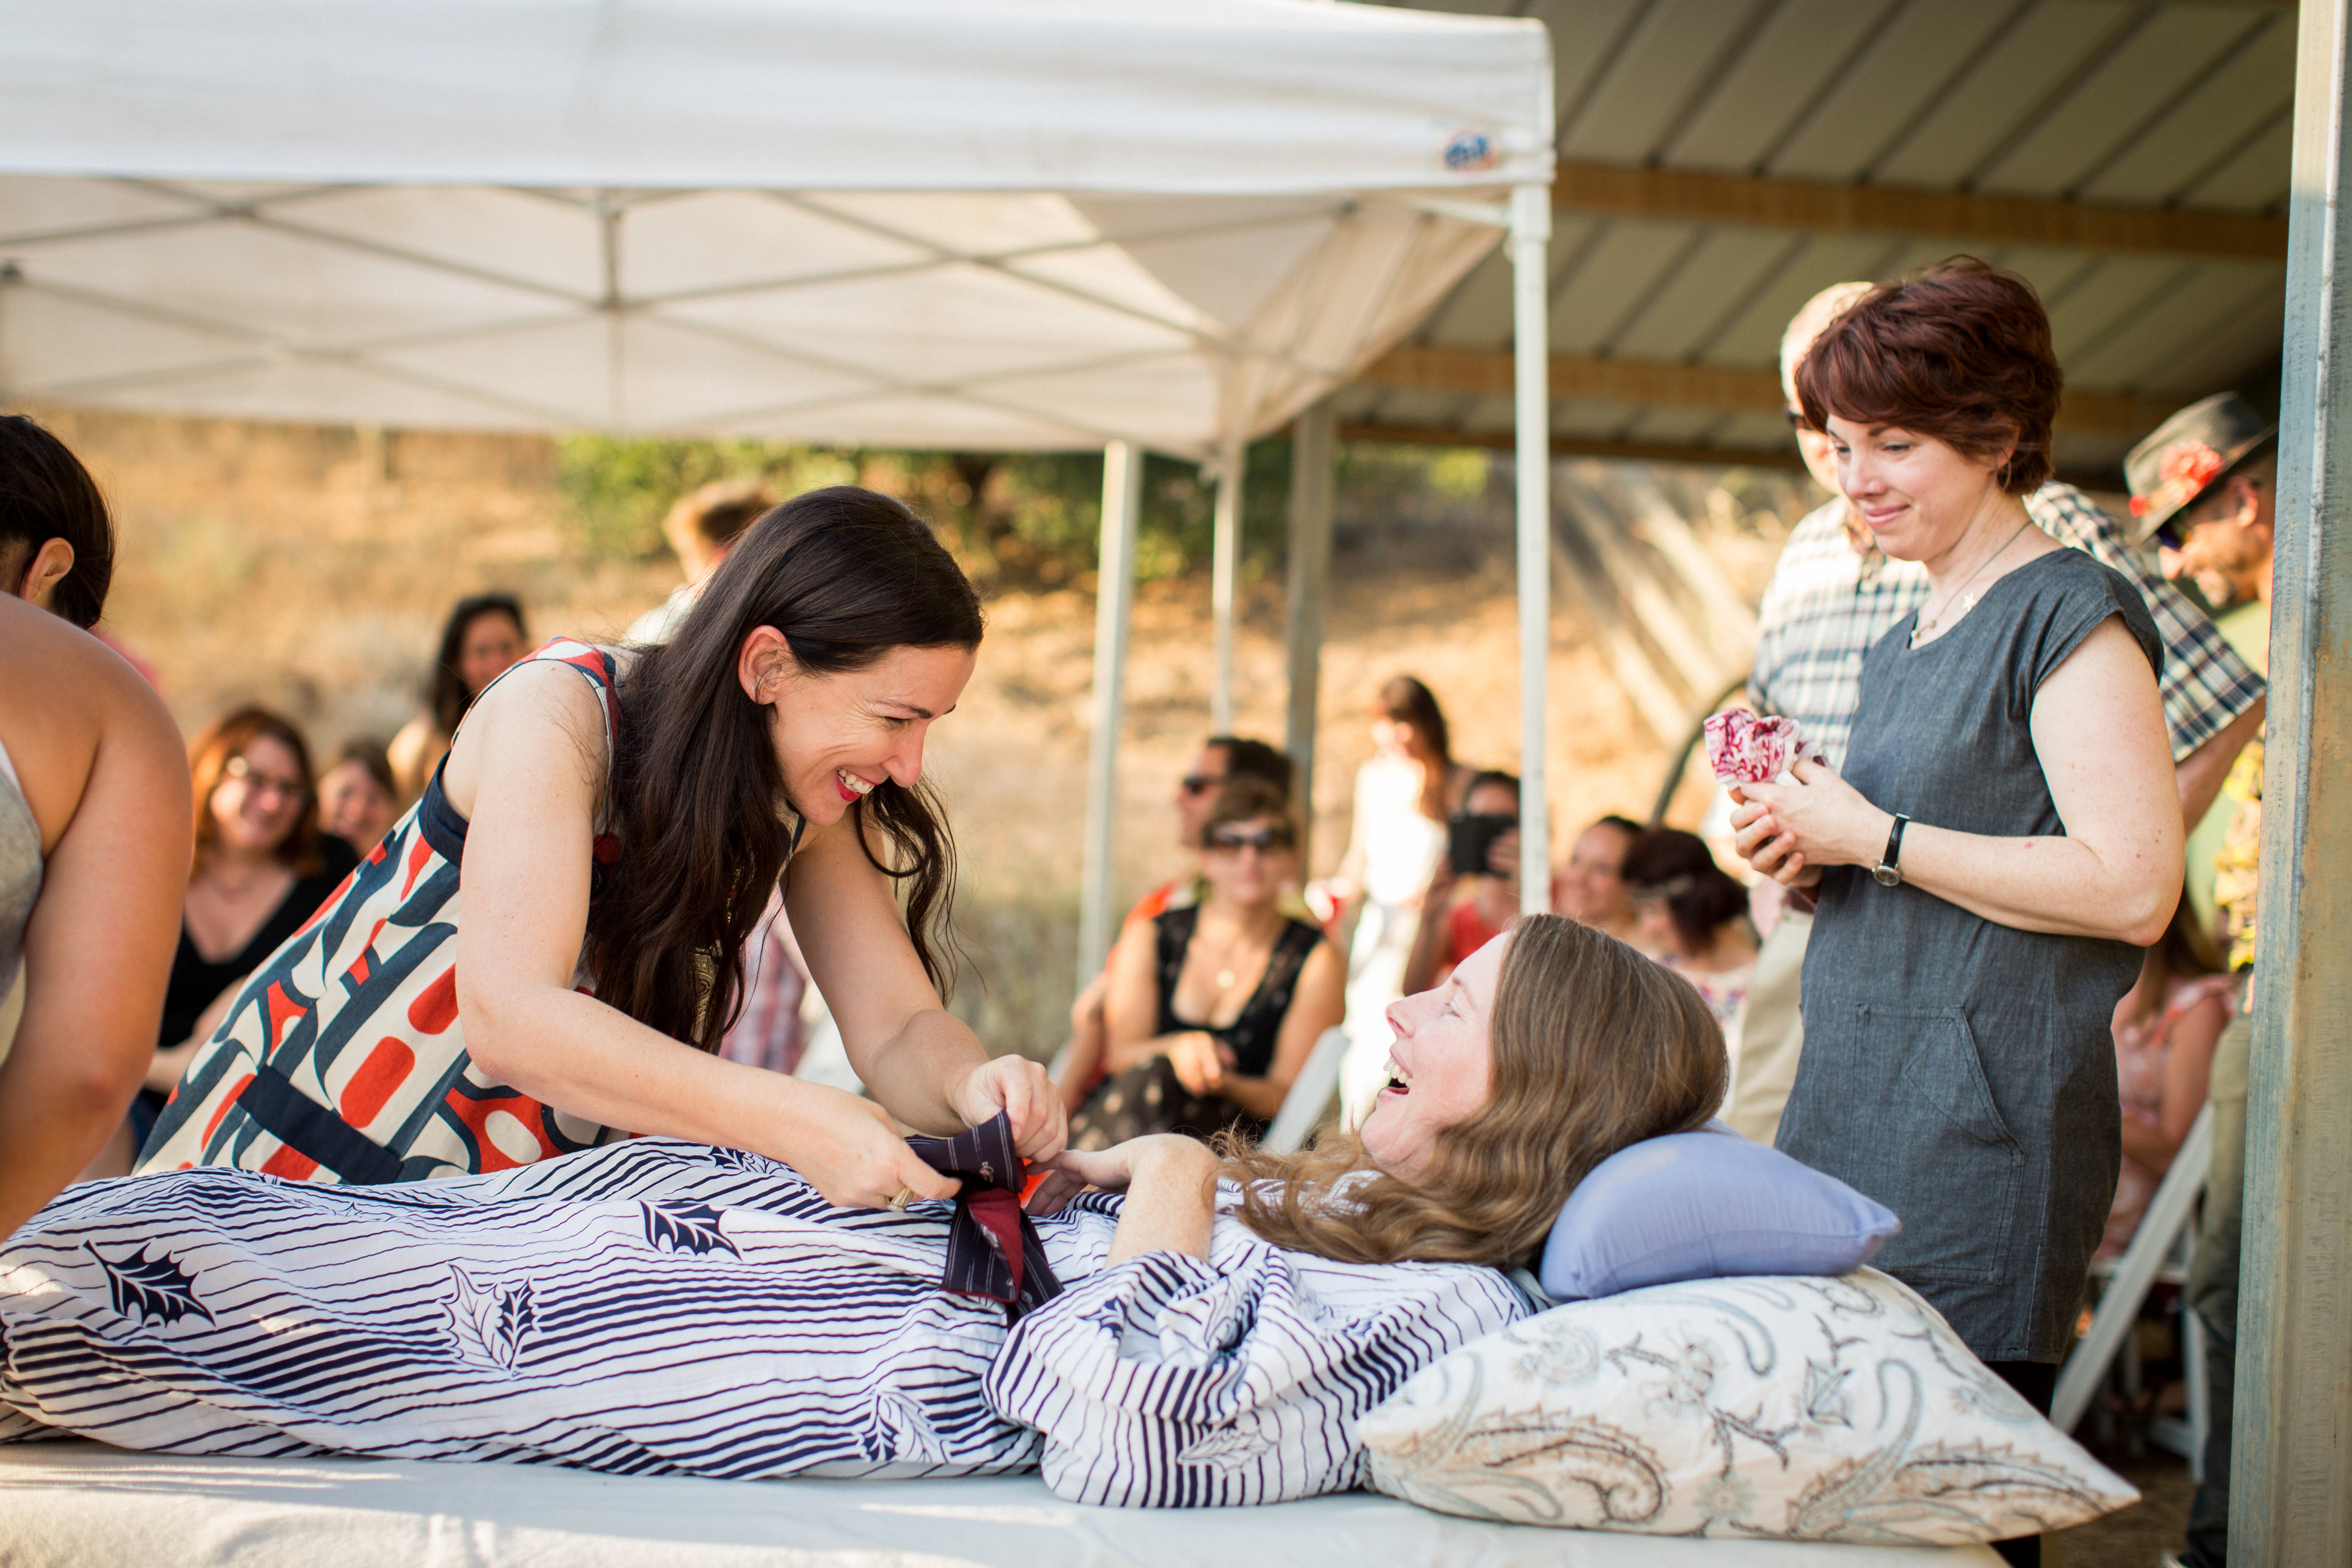 This July 24, 2016 photo provided by Niels Alpert, Amanda Friedland, left, surrounded by friends and family adjusts her friend Betsy Davis's sash as she lays on a bed during her "Right To Die Party" in Ojai, Calif. In early July, Davis emailed her closest friends and family to invite them to a two-day celebration, telling them: "These circumstances are unlike any party you have attended before, requiring emotional stamina, centeredness, and openness. And one rule: No crying." The 41-year-old woman diagnosed with ALS,  held the party to say goodbye before becoming one of the first California residents to take life-ending drugs under a new law that gave such an option to the terminally ill. (Niels Alpert via AP)